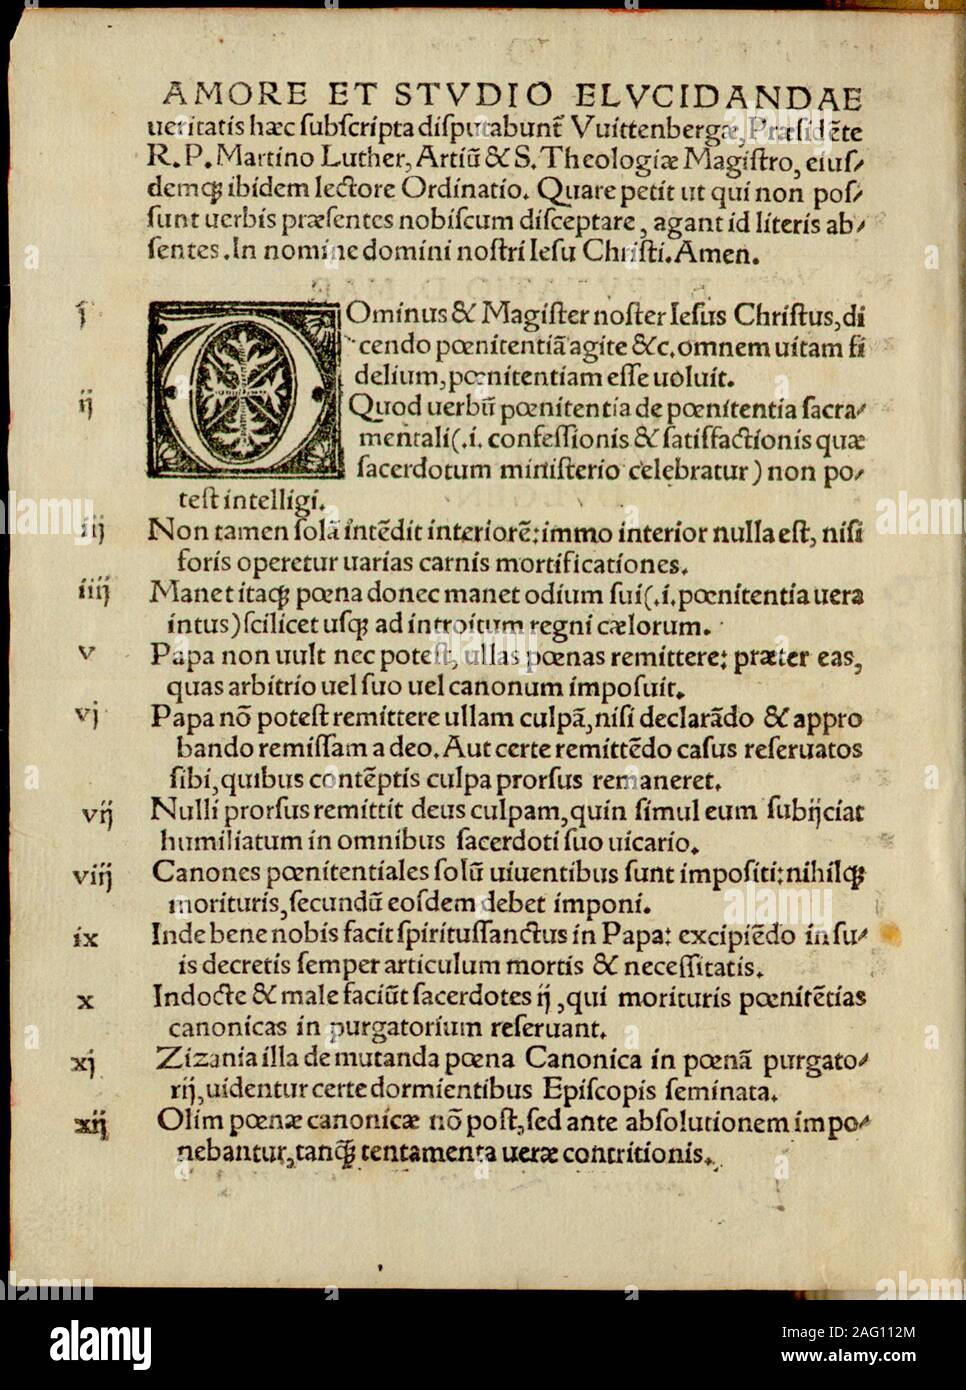 The Ninety-five Theses or Disputation on the Power of Indulgences by Martin Luther, 1517. Found in the Collection of Universit&#xe4;tsbibliothek Basel. Stock Photo